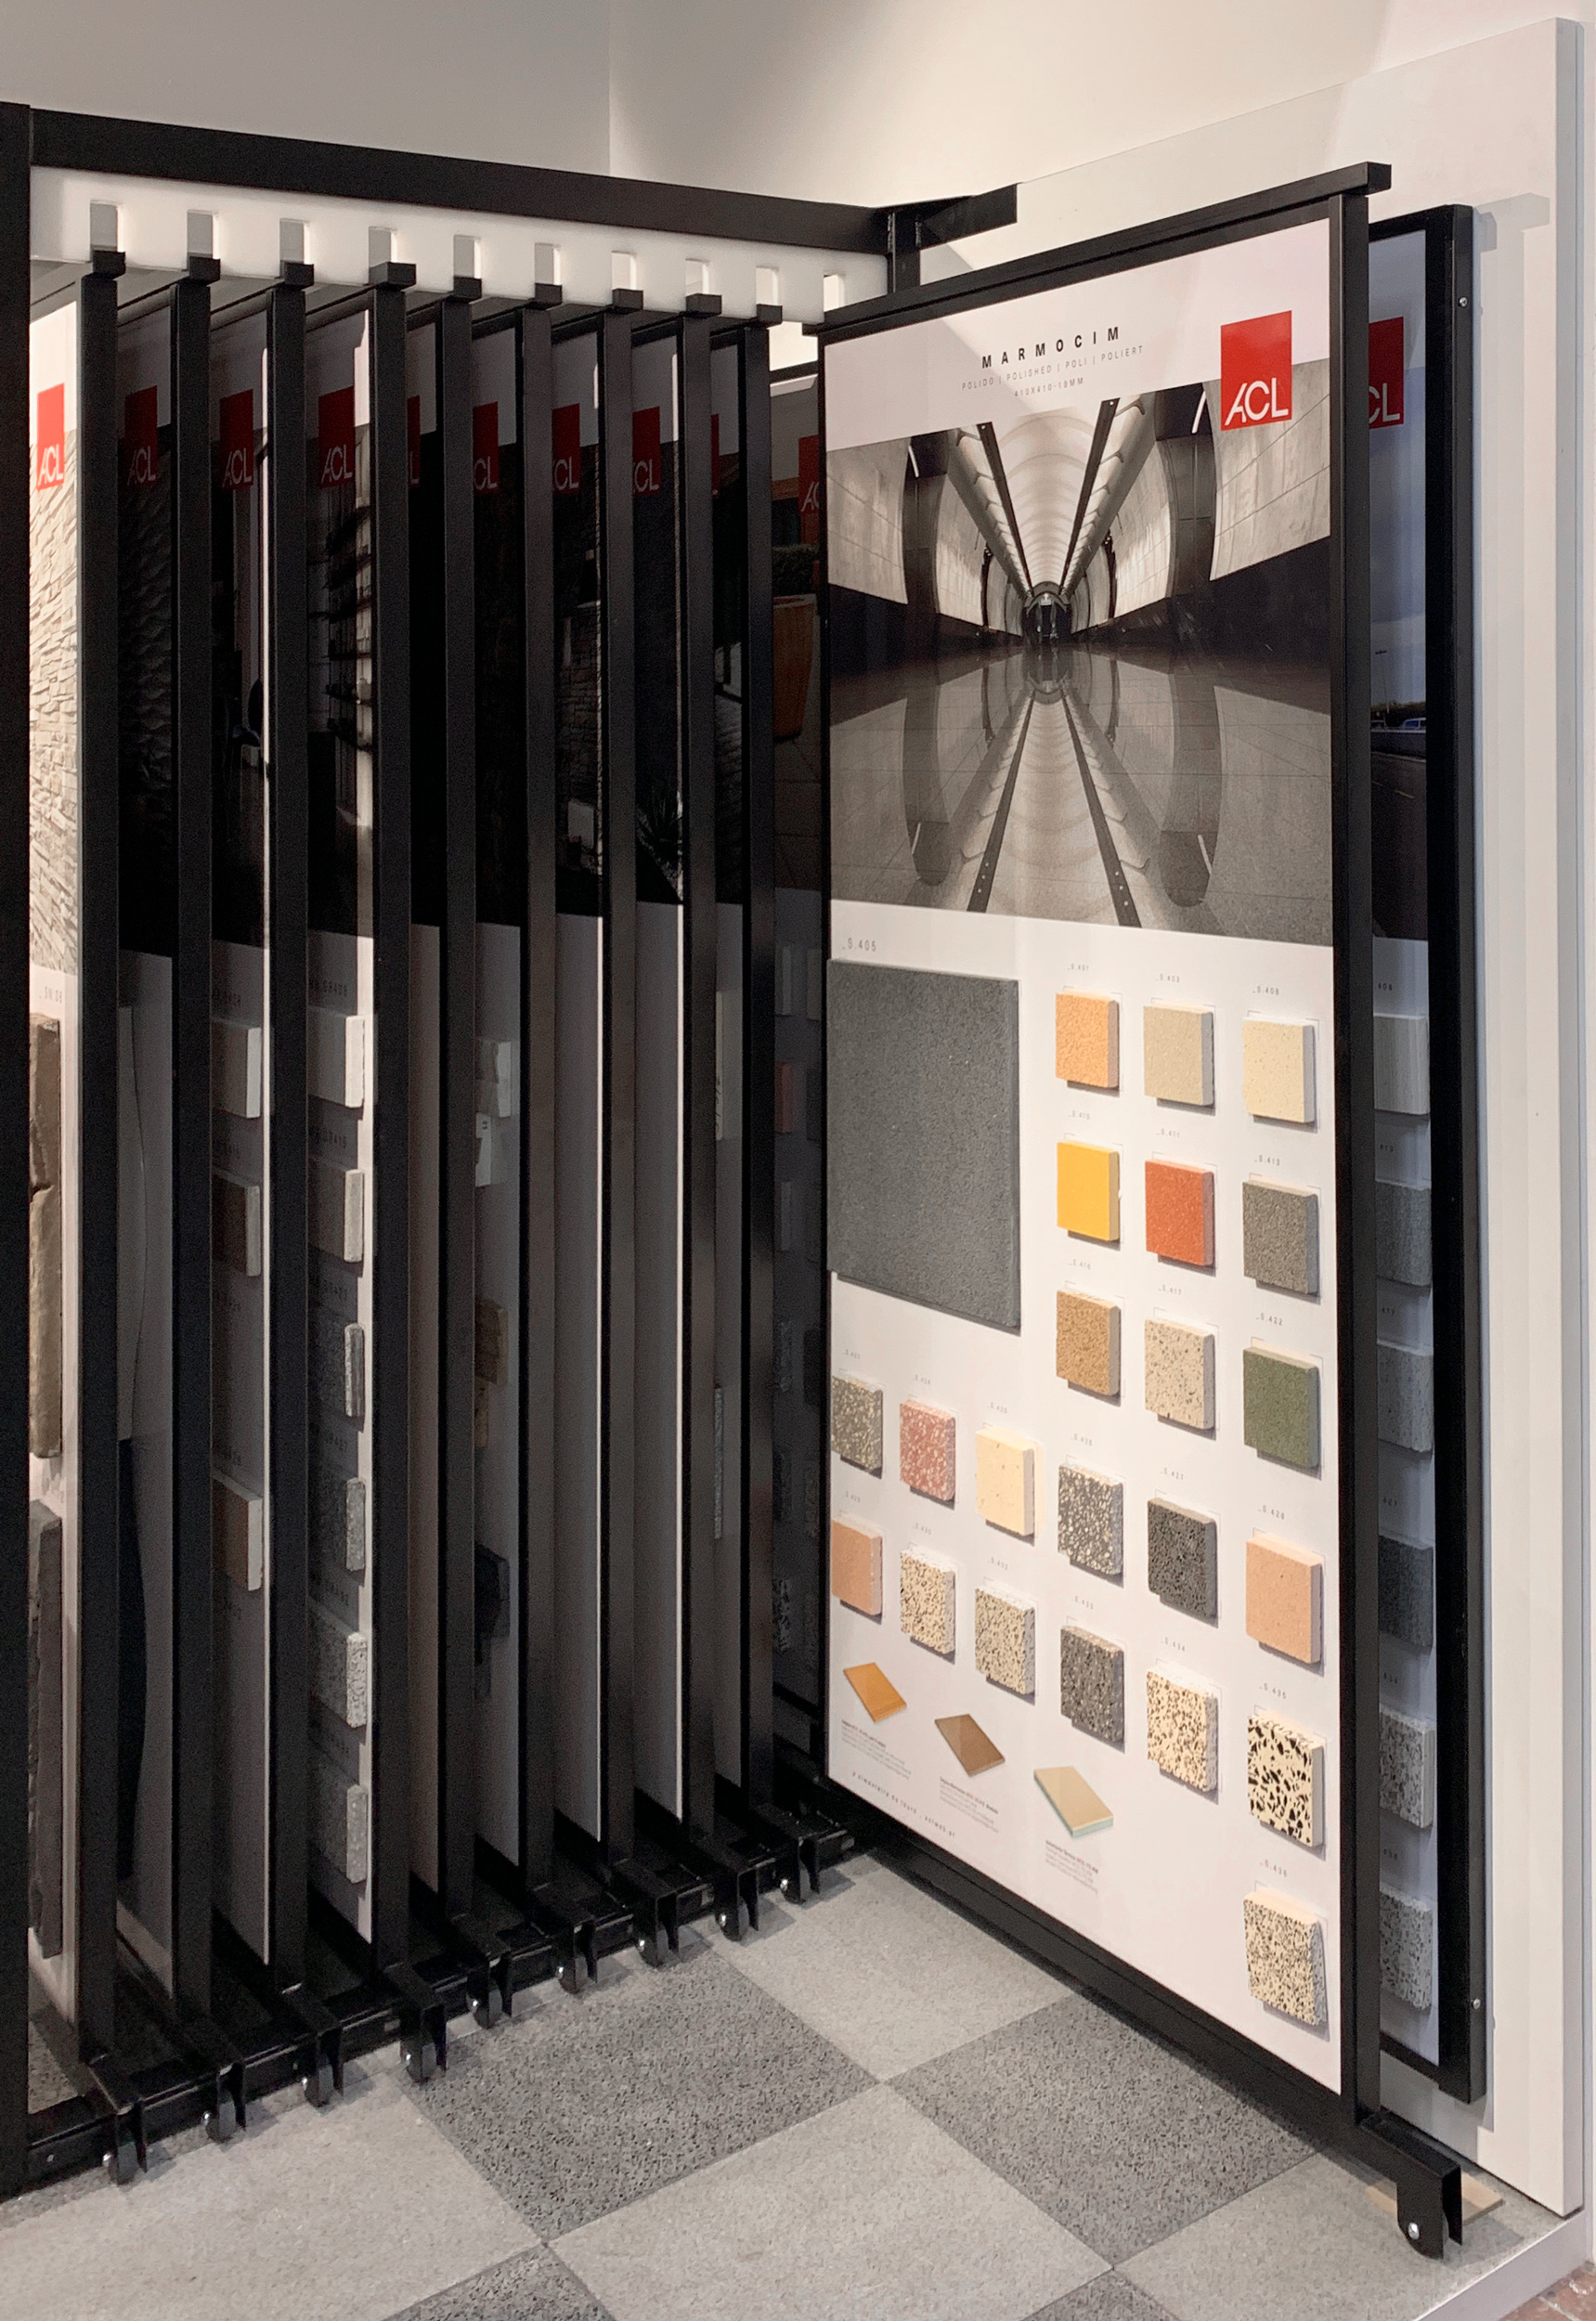 ACL Cersaie Stand